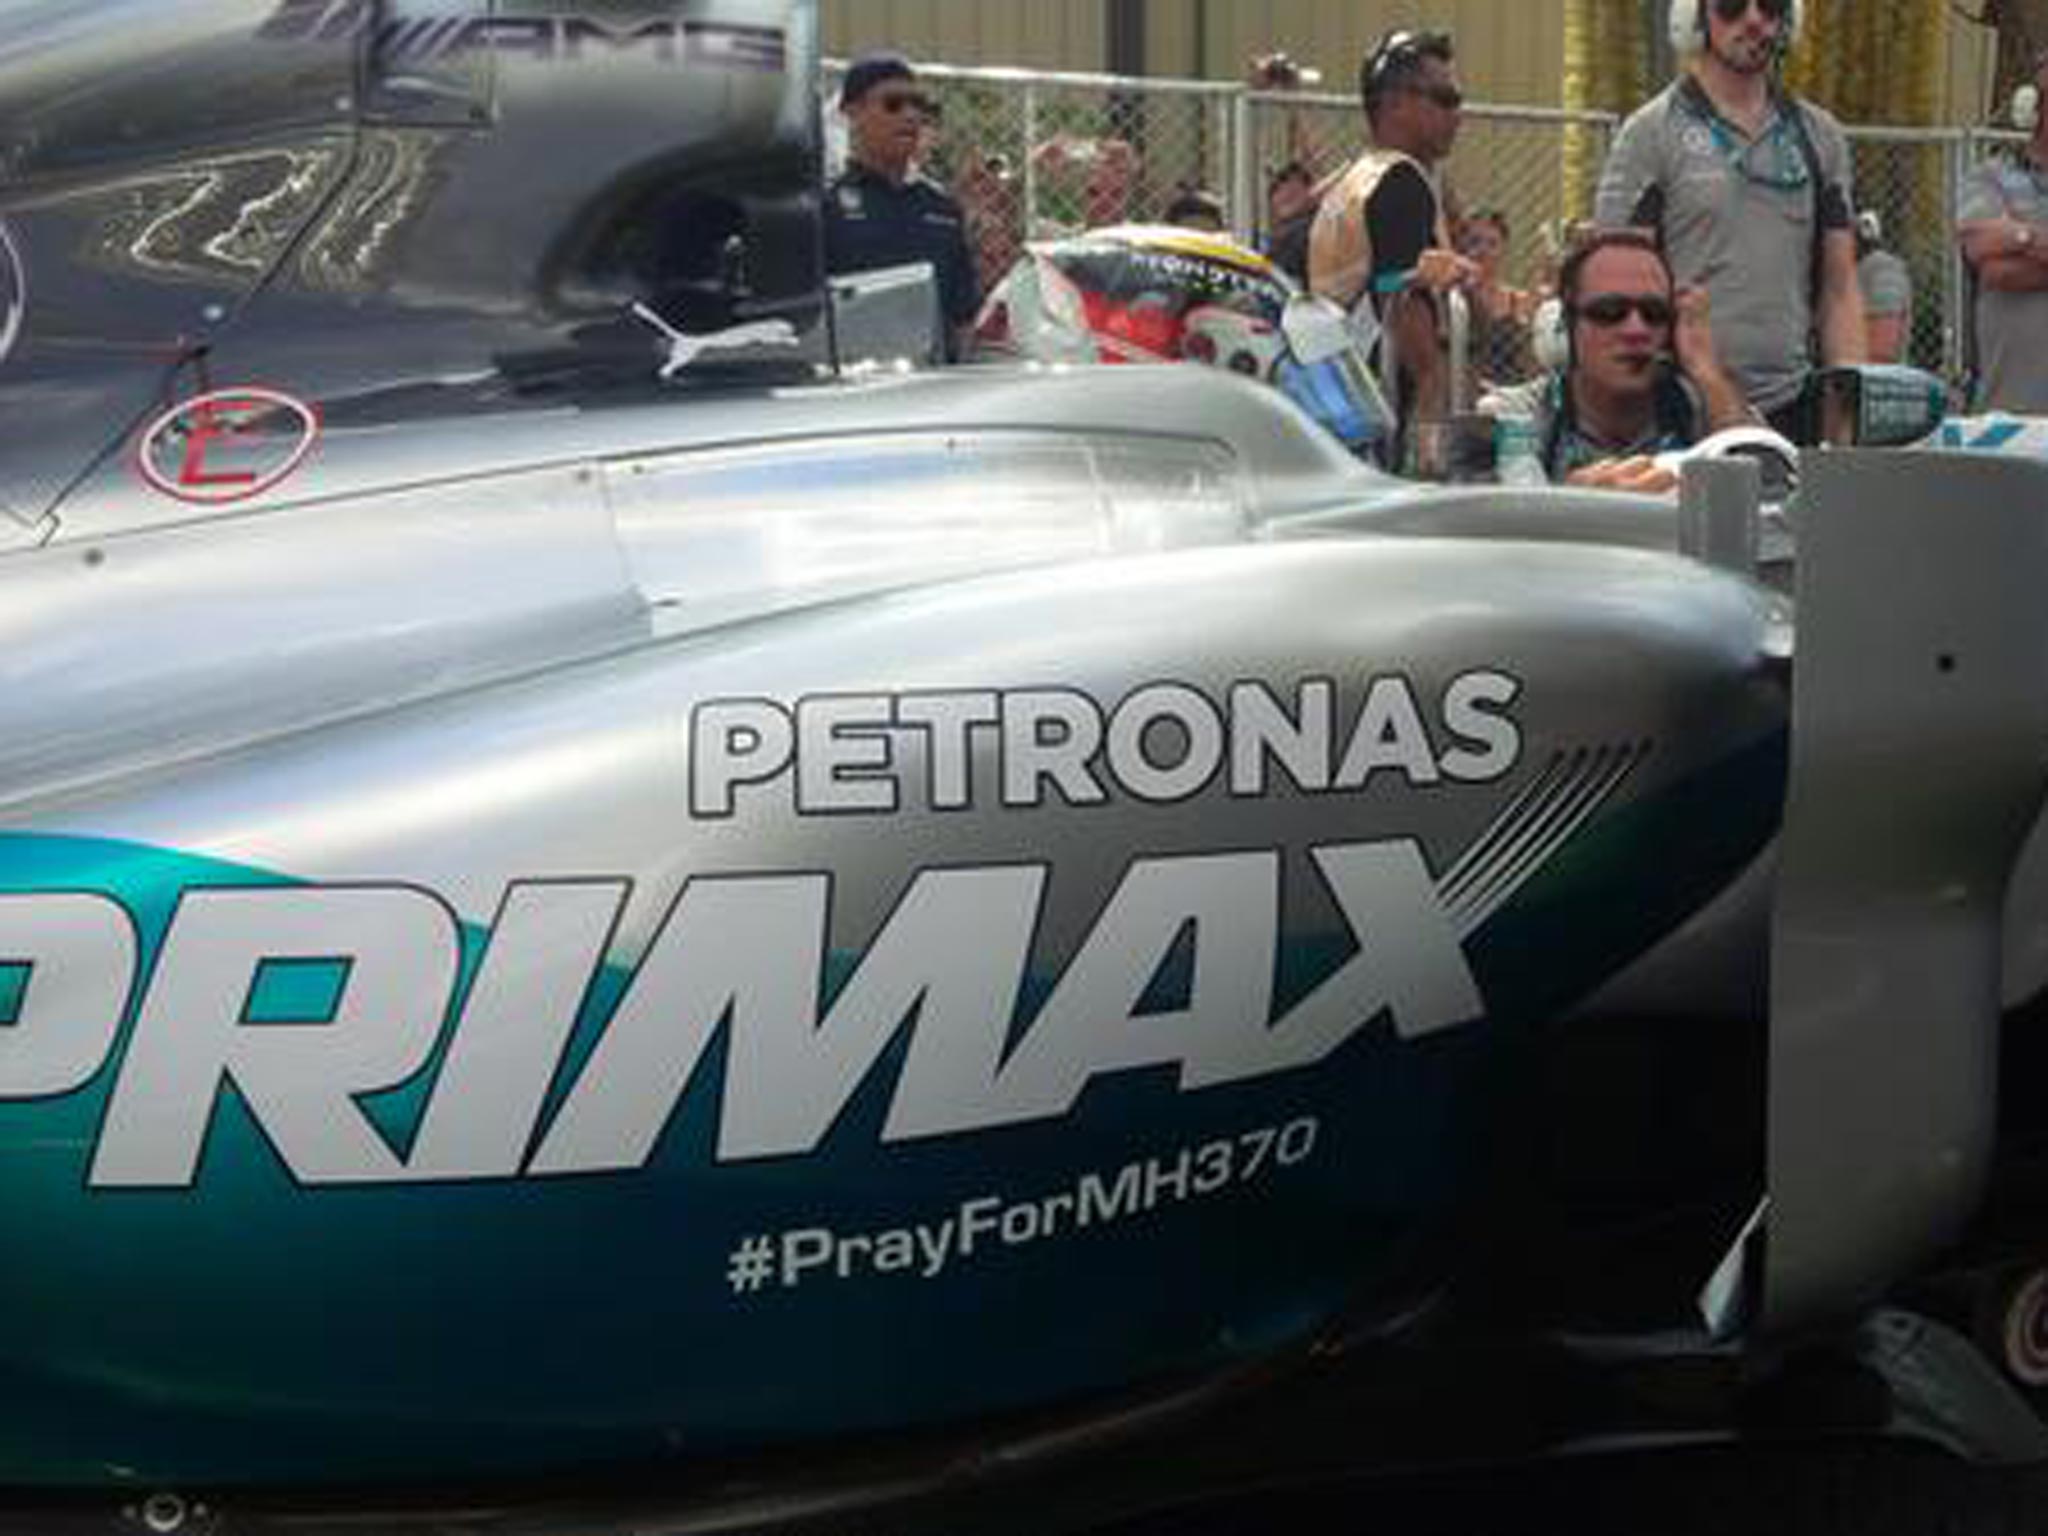 Mercedes ran a tribute to the Malaysian Airlines flight MH370 that is believed to have crashed into the Indian Ocean